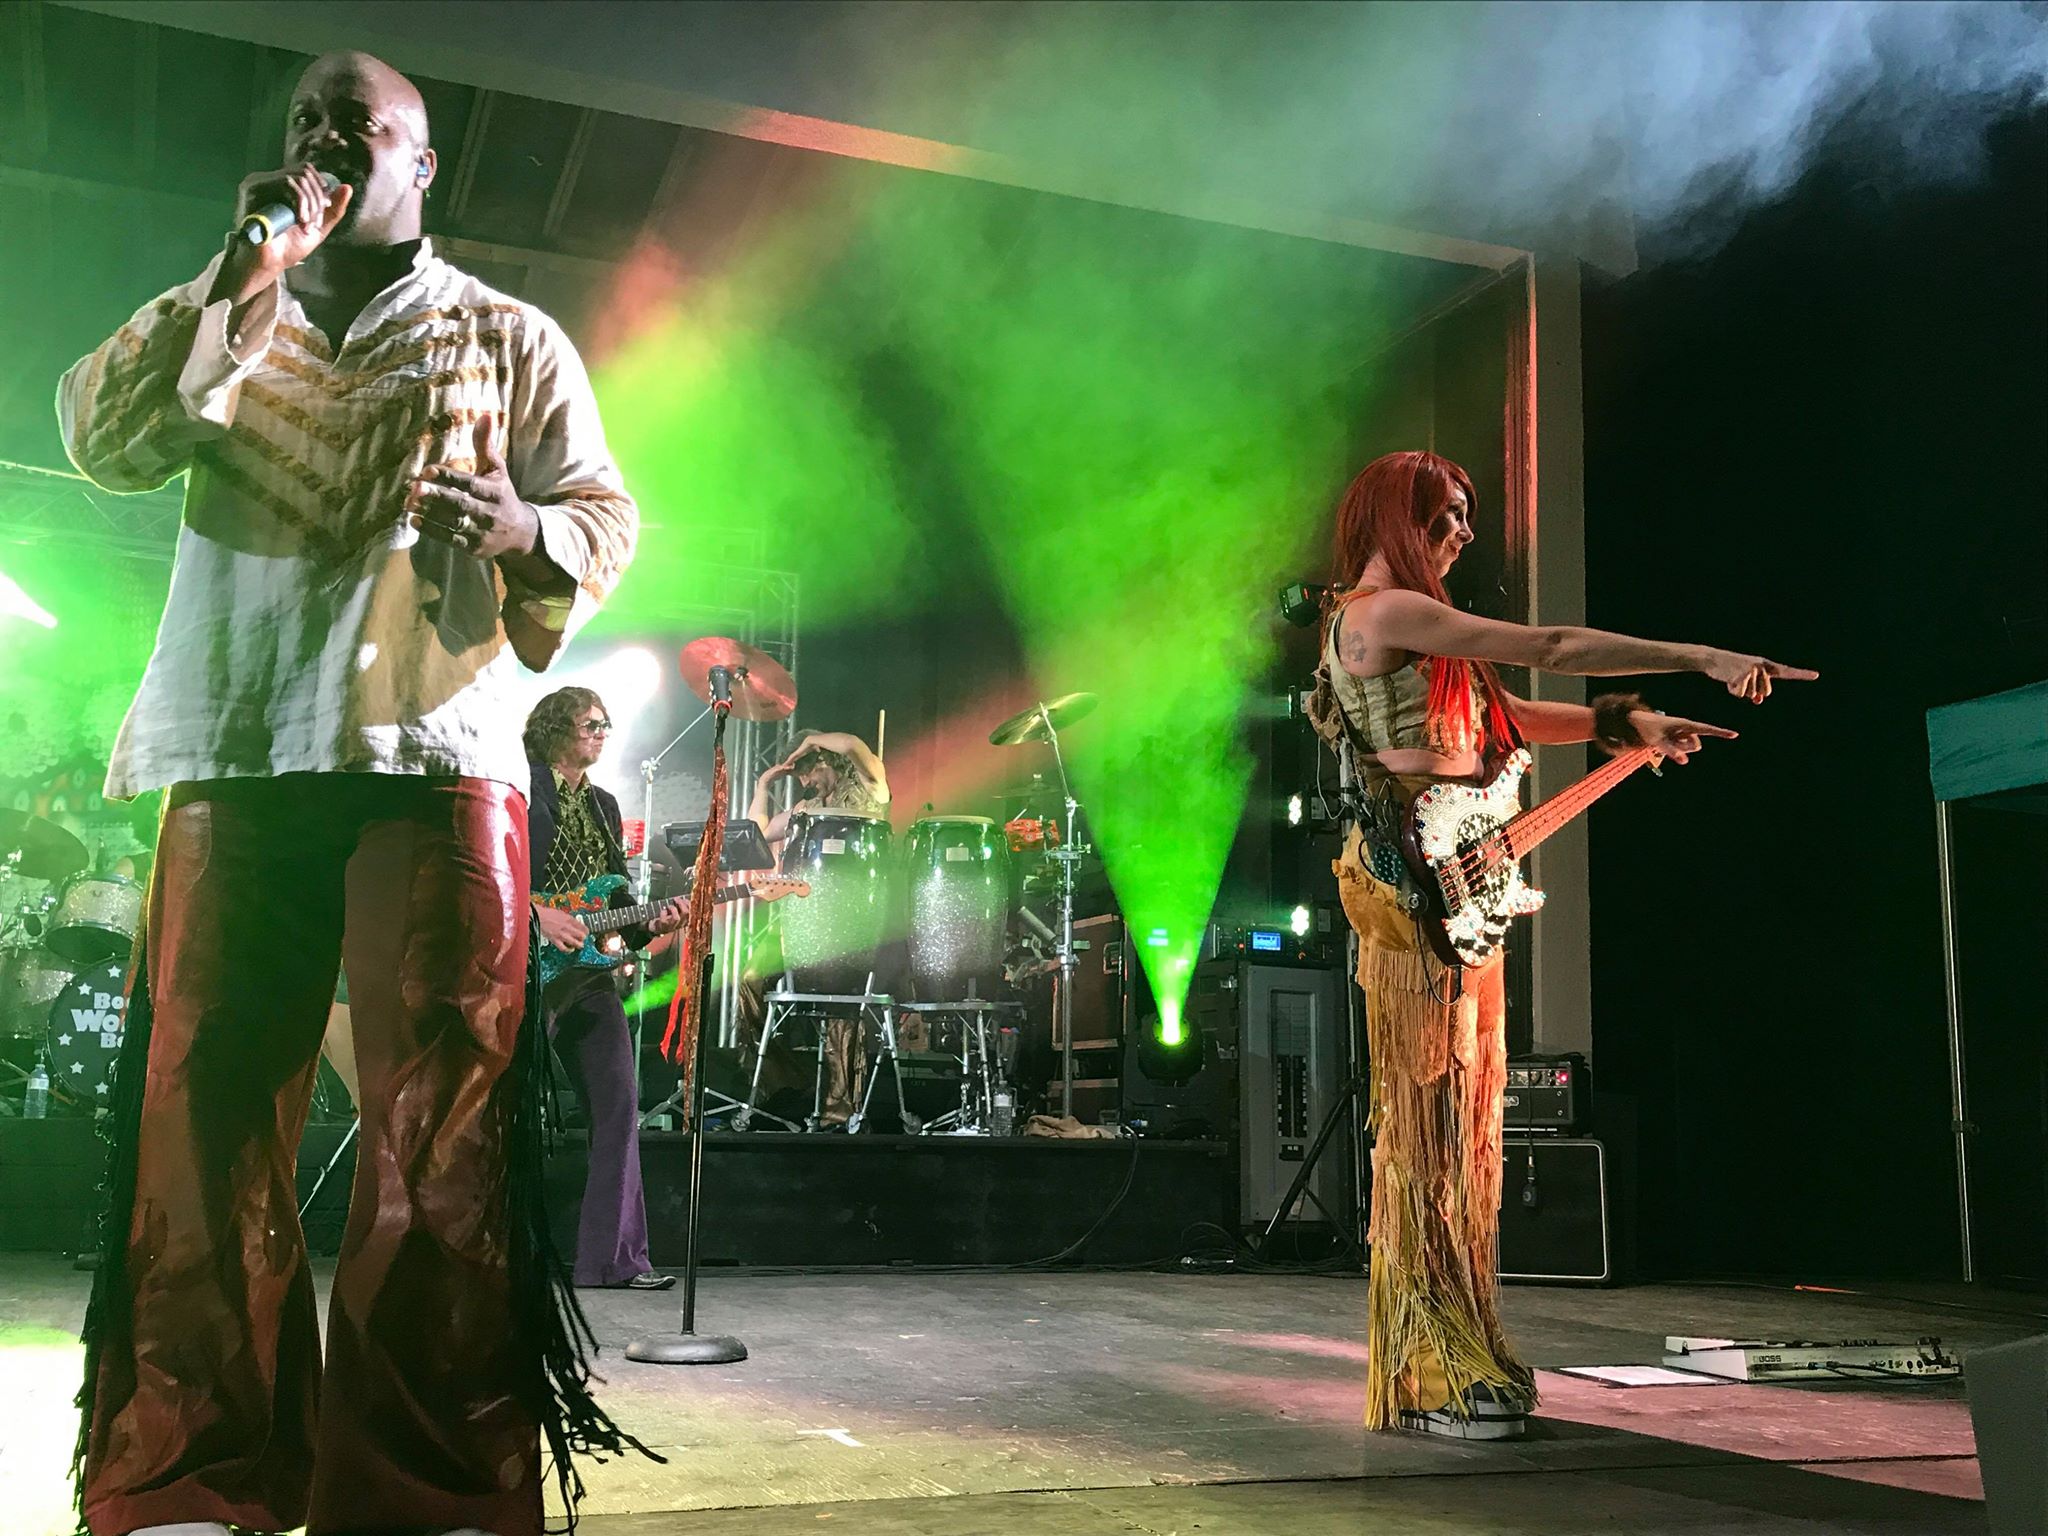 http://www.familycampgrounds.ca/wp-content/uploads/2018/08/boogie-wonder-band-complexe-atlantide-2018-28.jpg